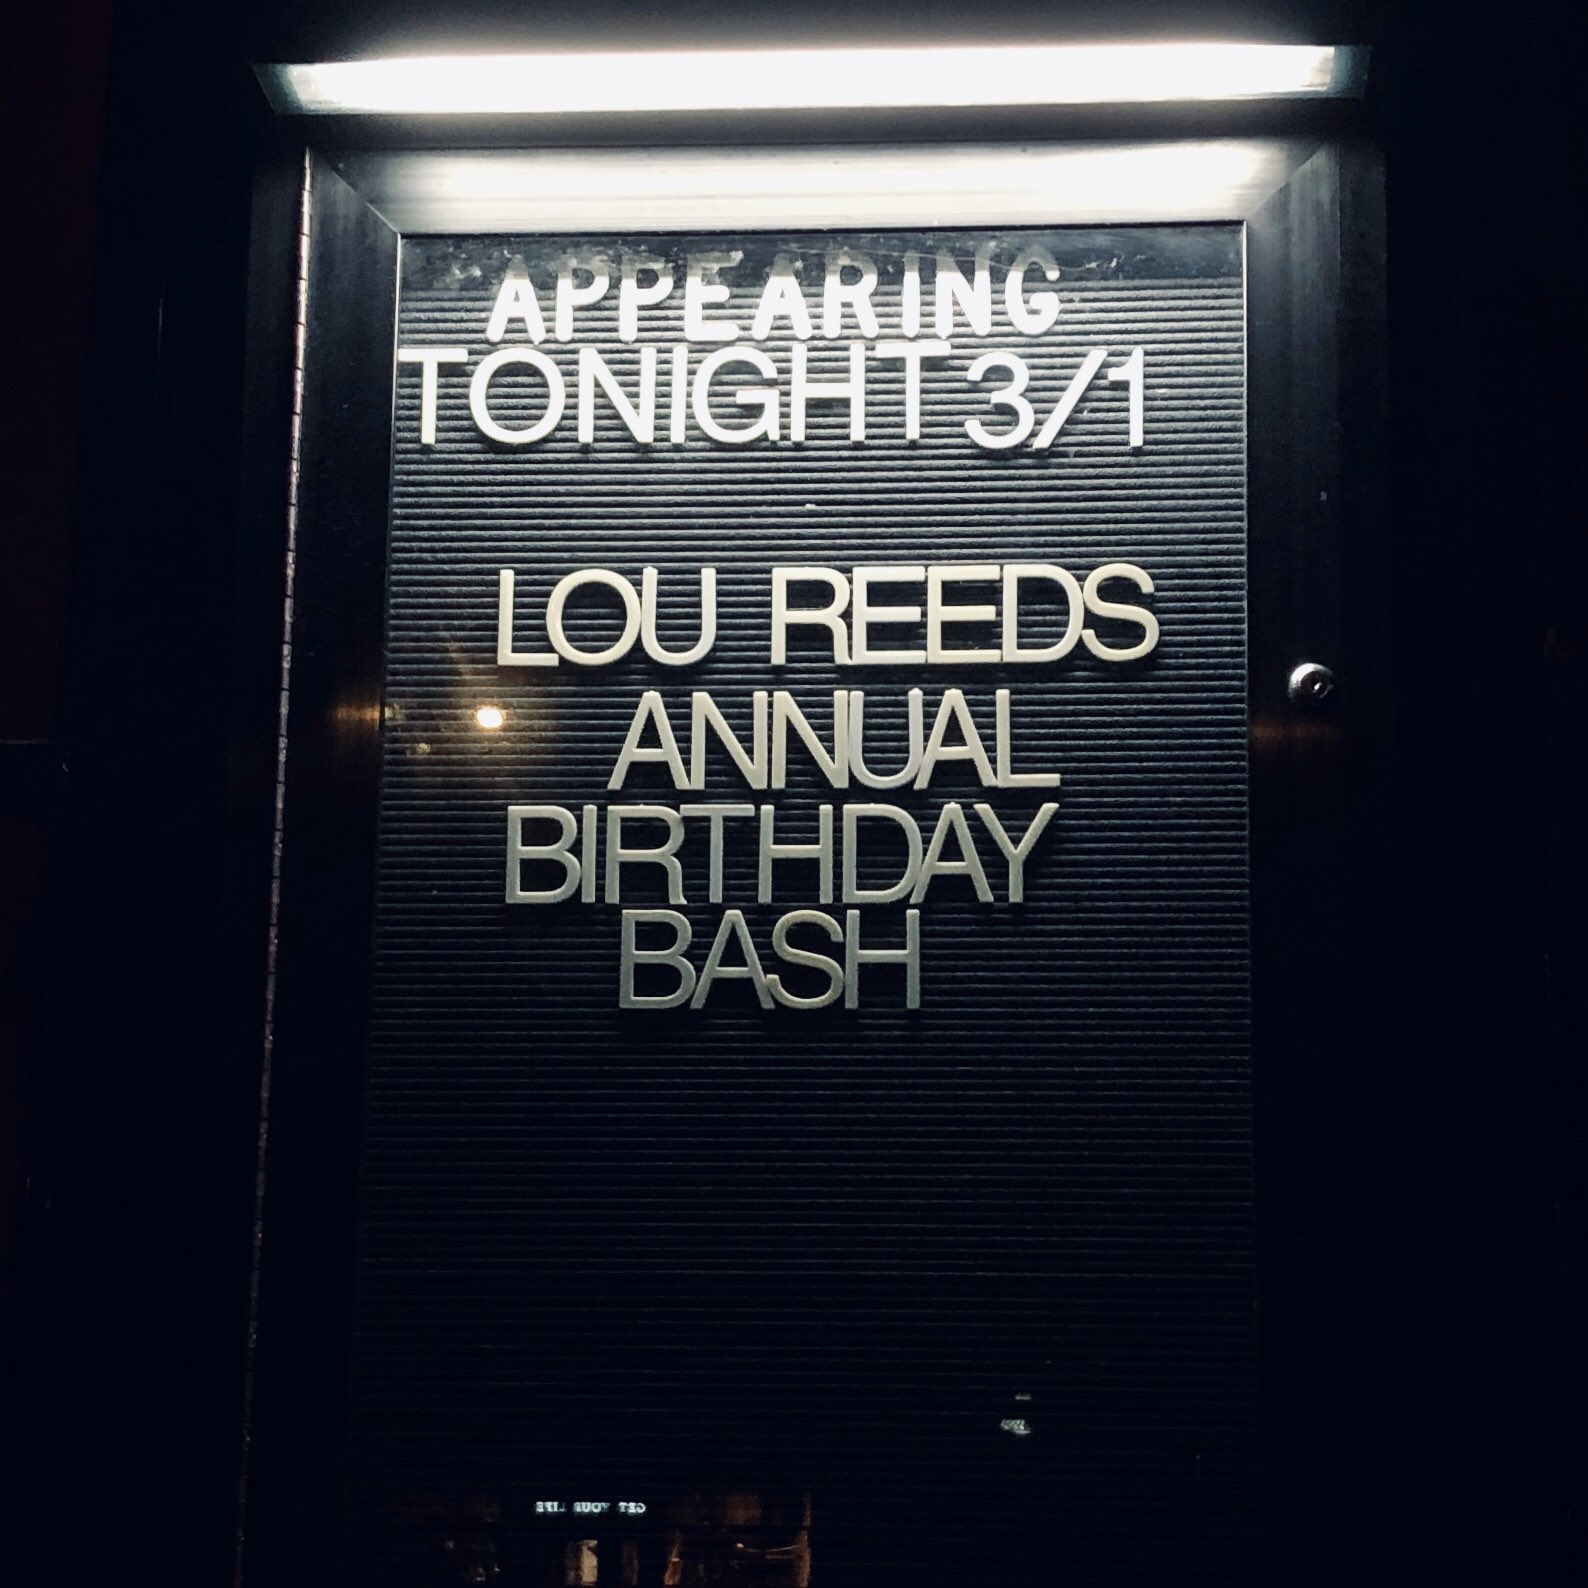 Had a blast rocking last night celebrating the life and music of Lou Reed.  Happy Birthday Lou! 